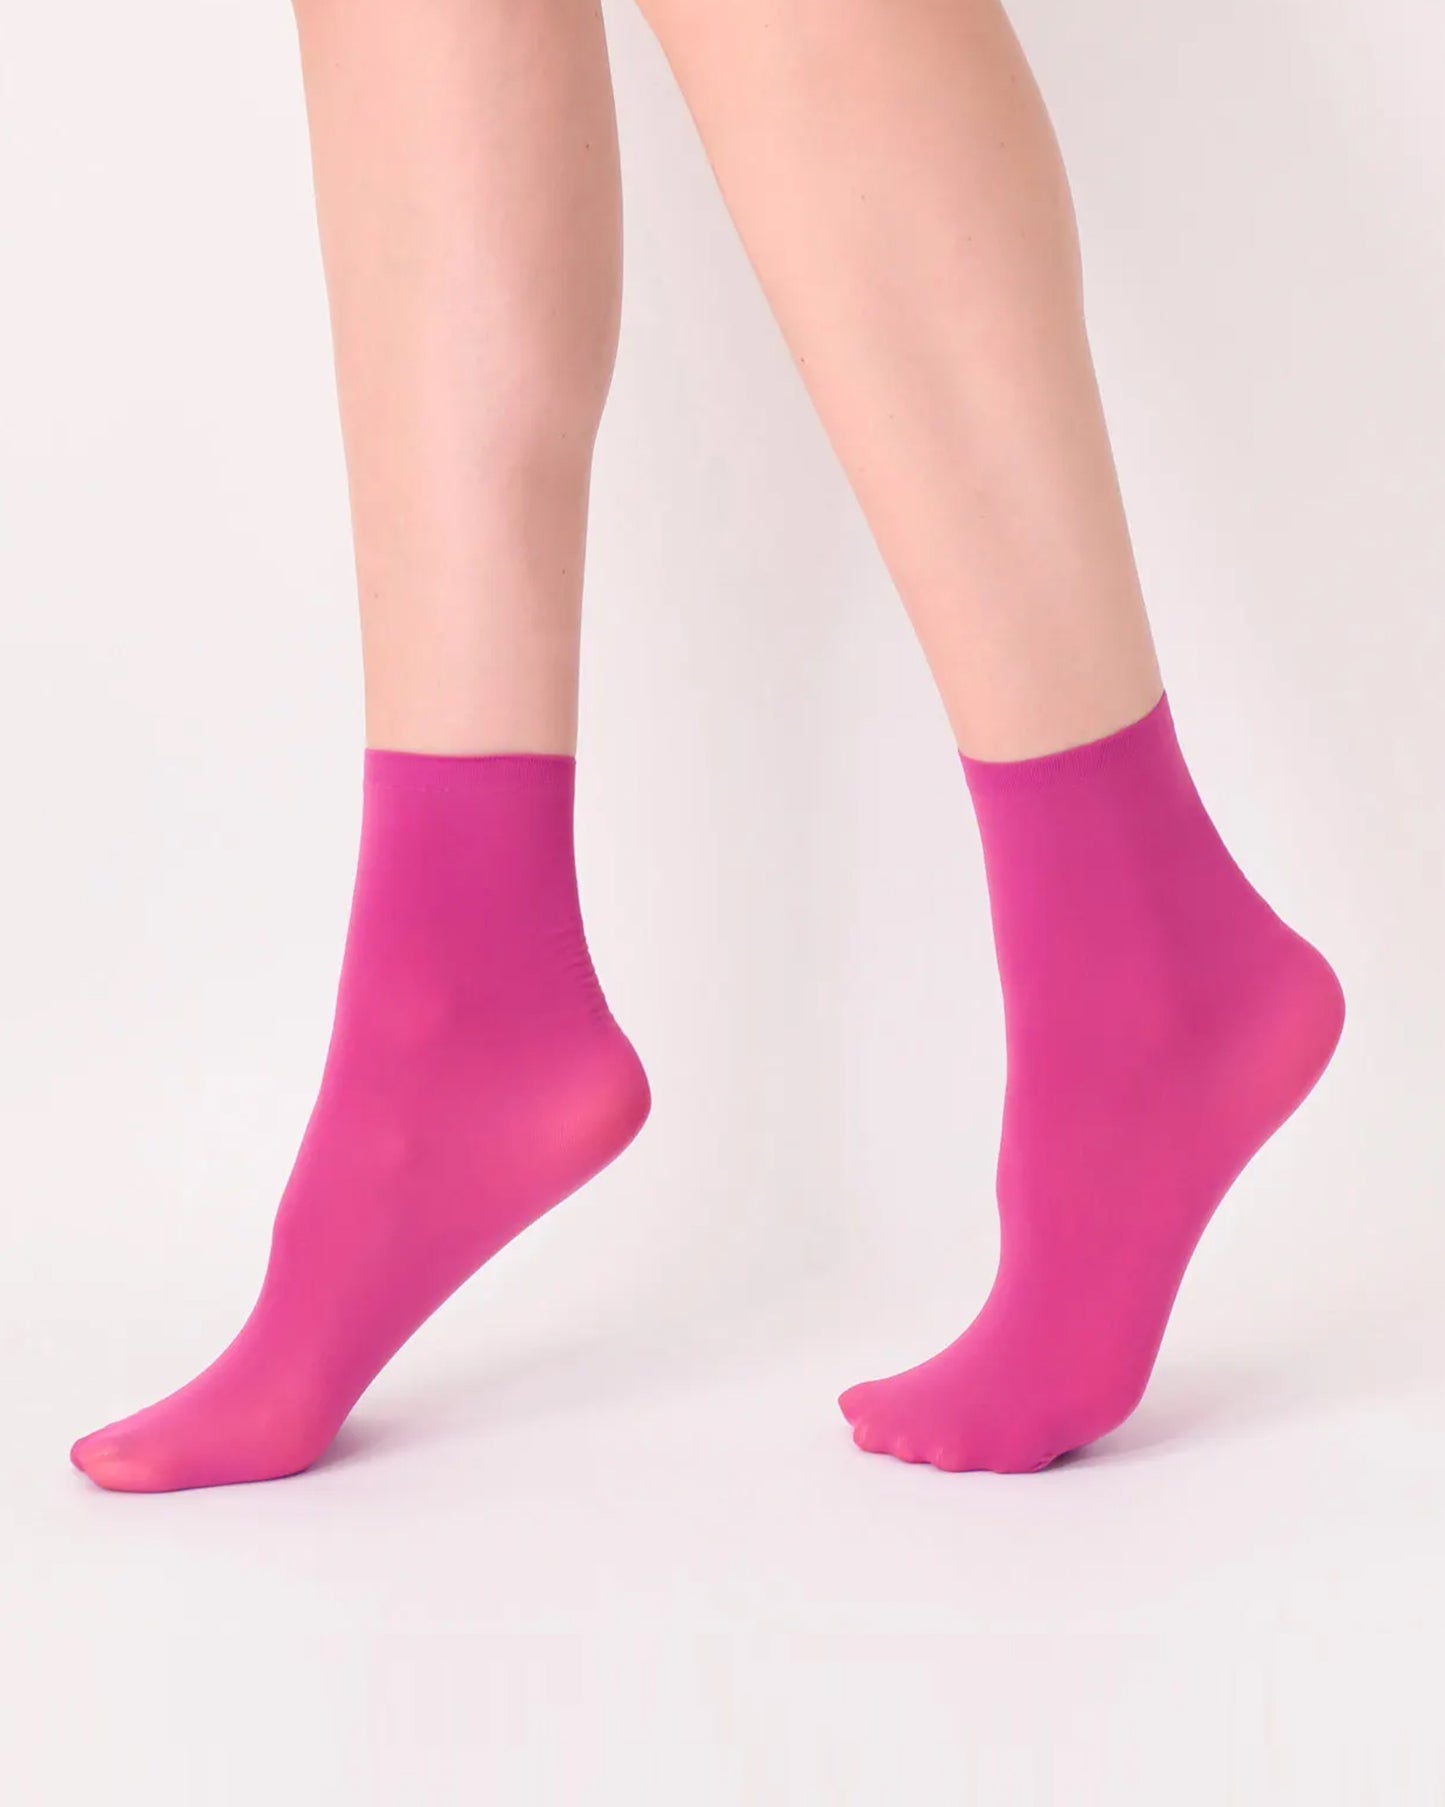 Oroblù All Colors Sock - Soft plain pink (glossy) opaque ankle tube socks with plain cuff.